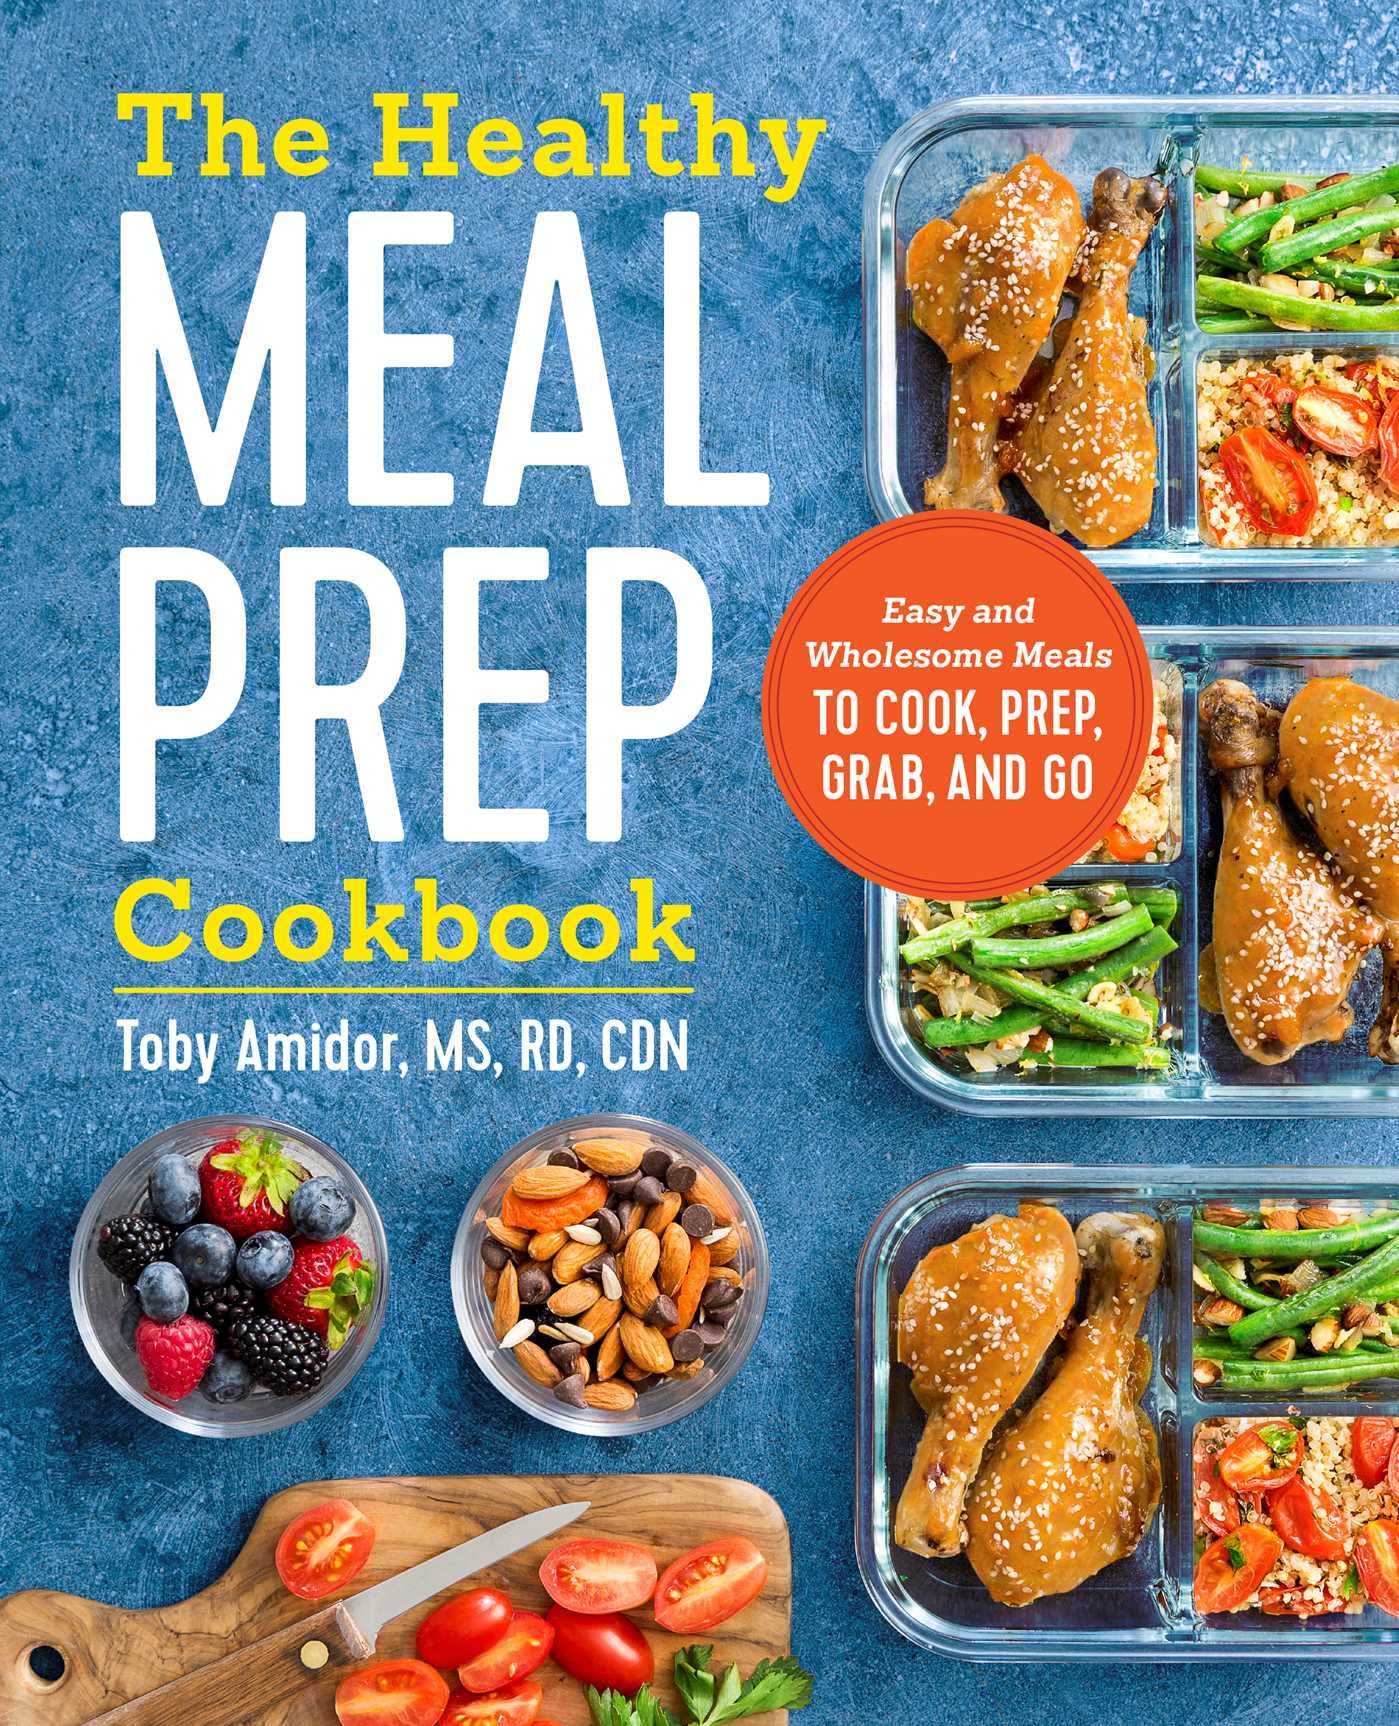 The Healthy Meal Prep Cookbook: Easy and Wholesome Meals to Cook, Prep, Grab, and Go by Amidor, Toby